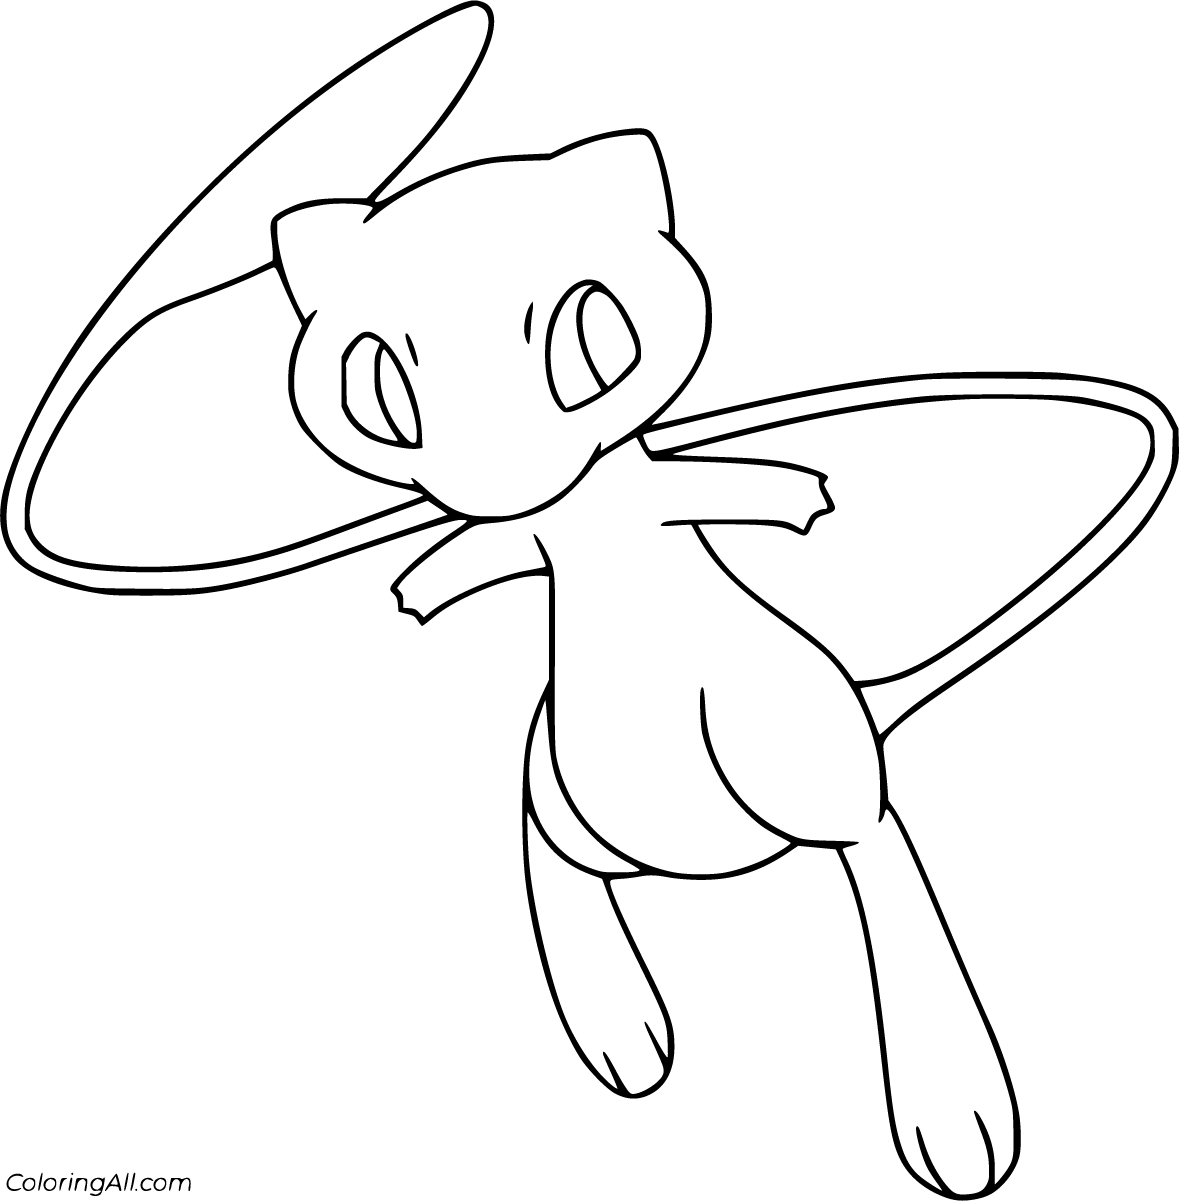 Mythical pokemon coloring pages